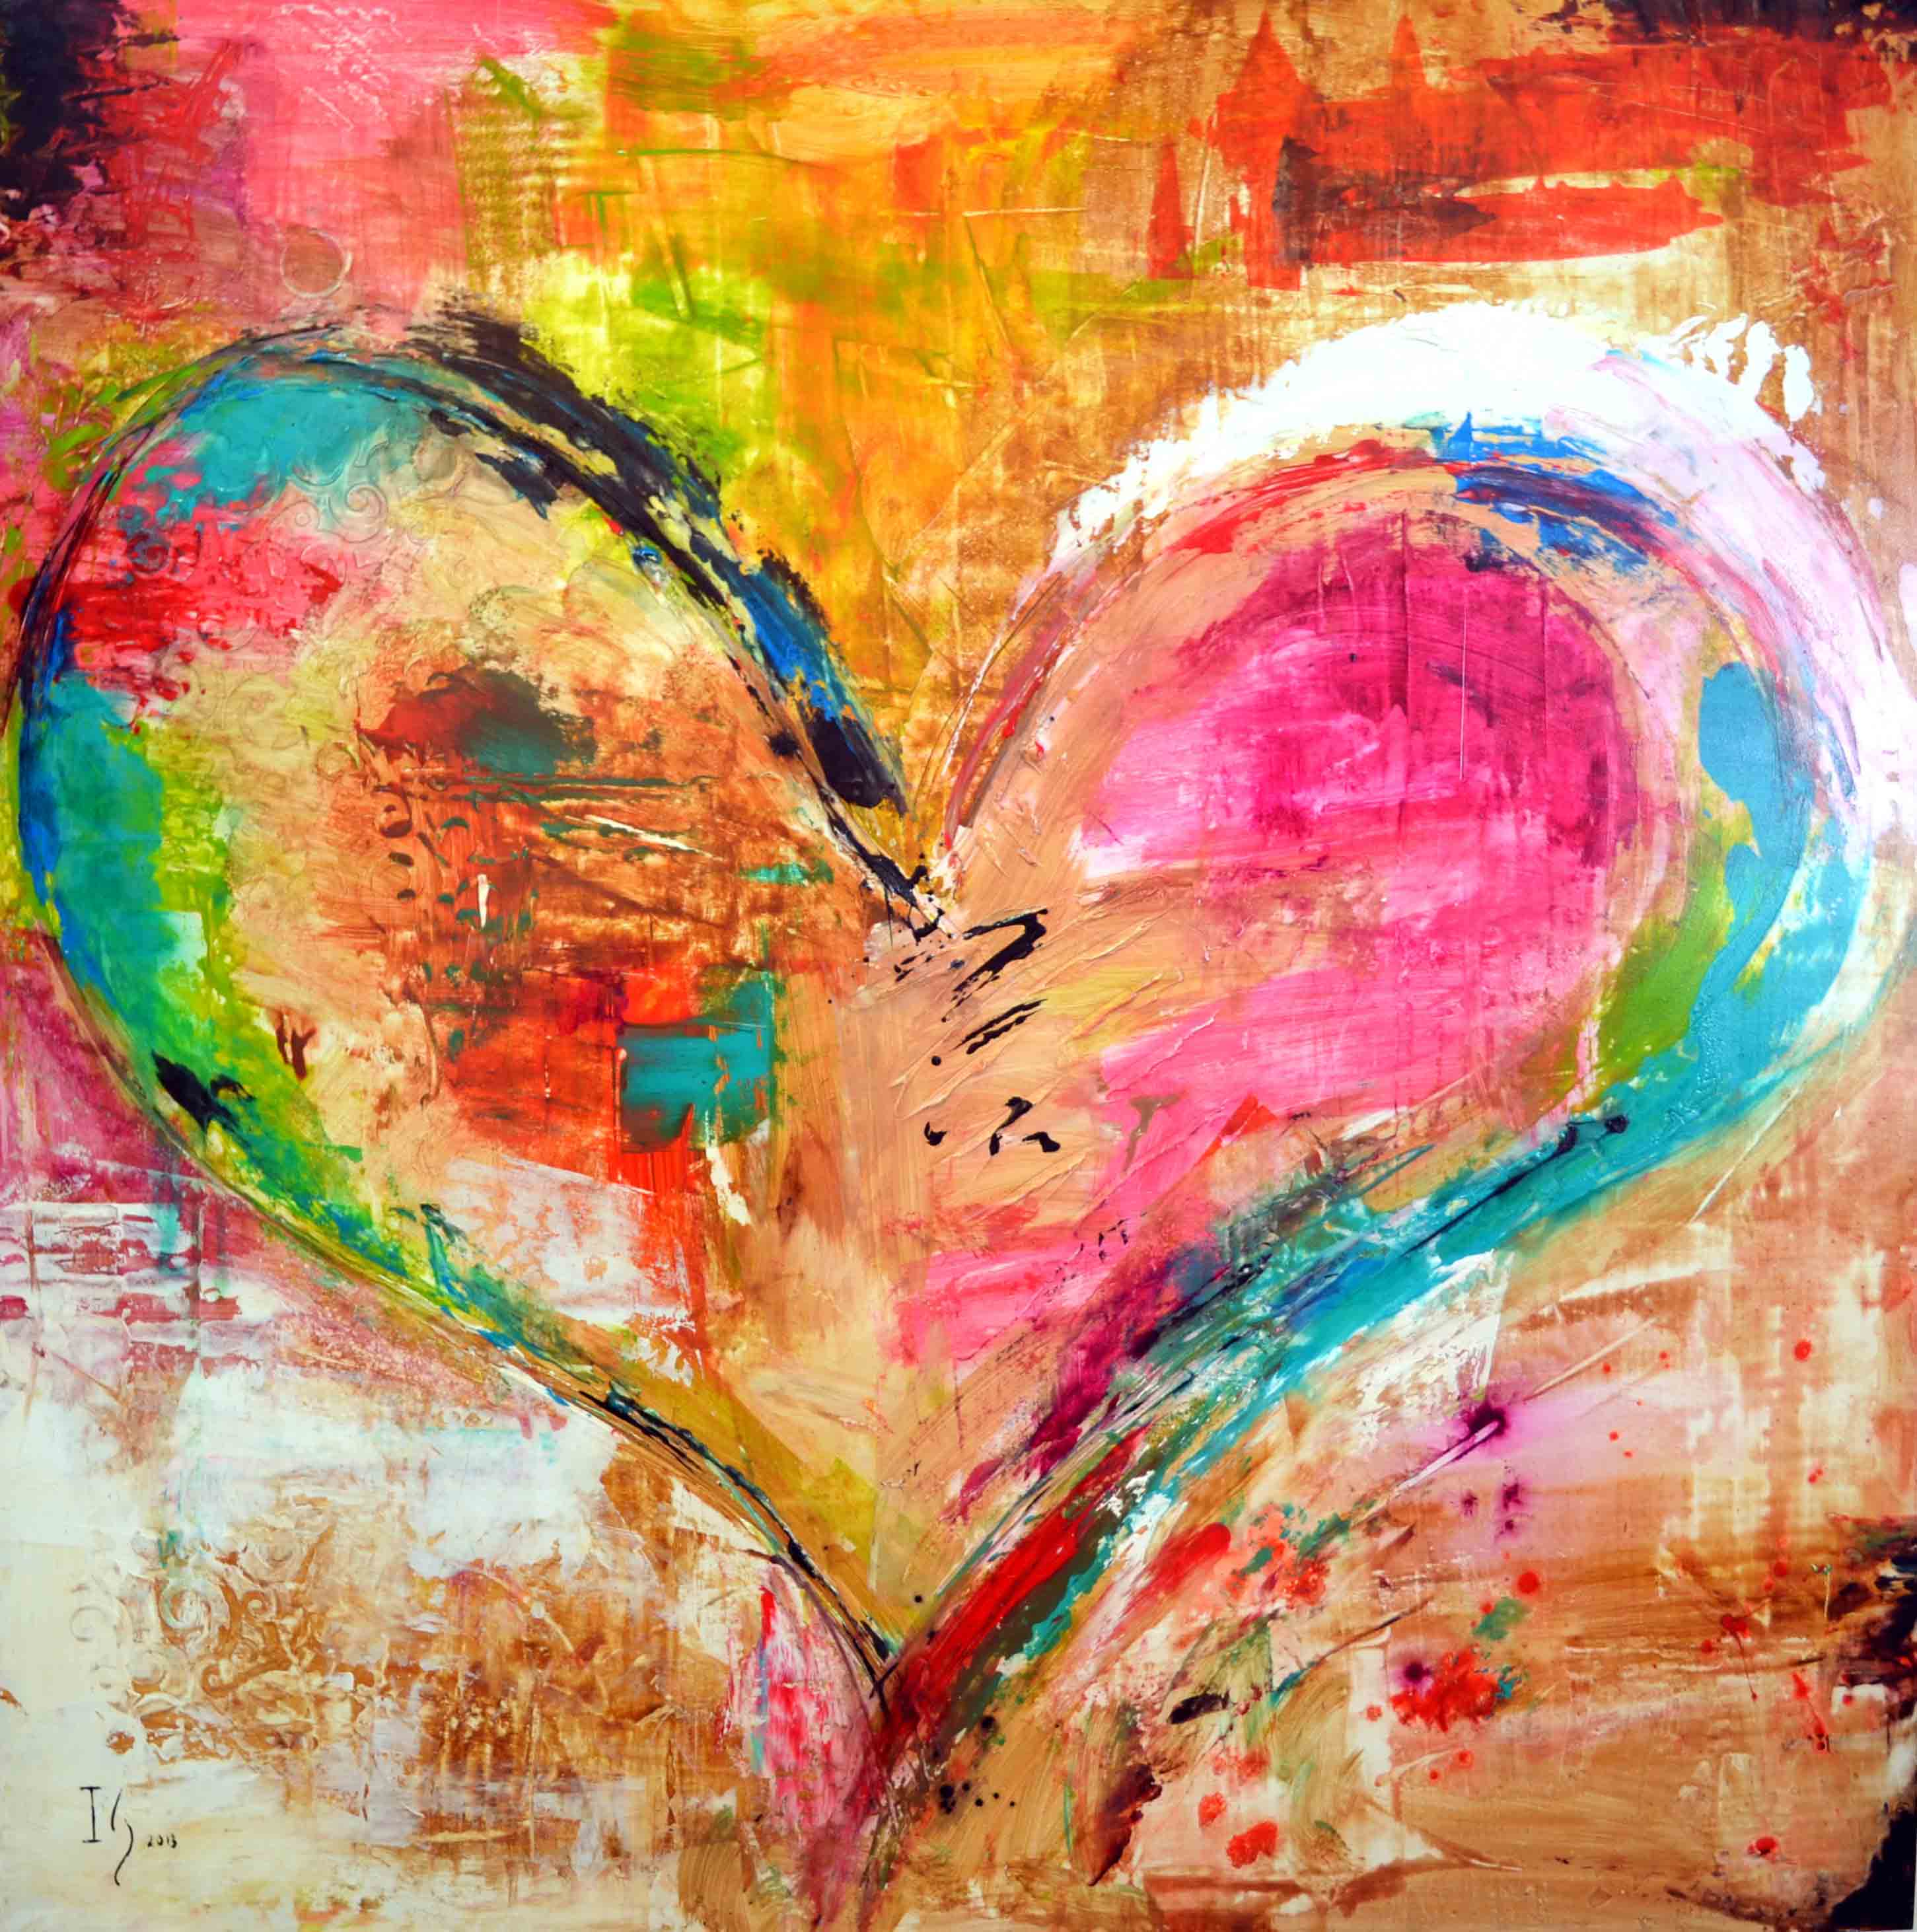 Heart Paintings - IVAN GUADERRAMA |OFFICIAL SITE